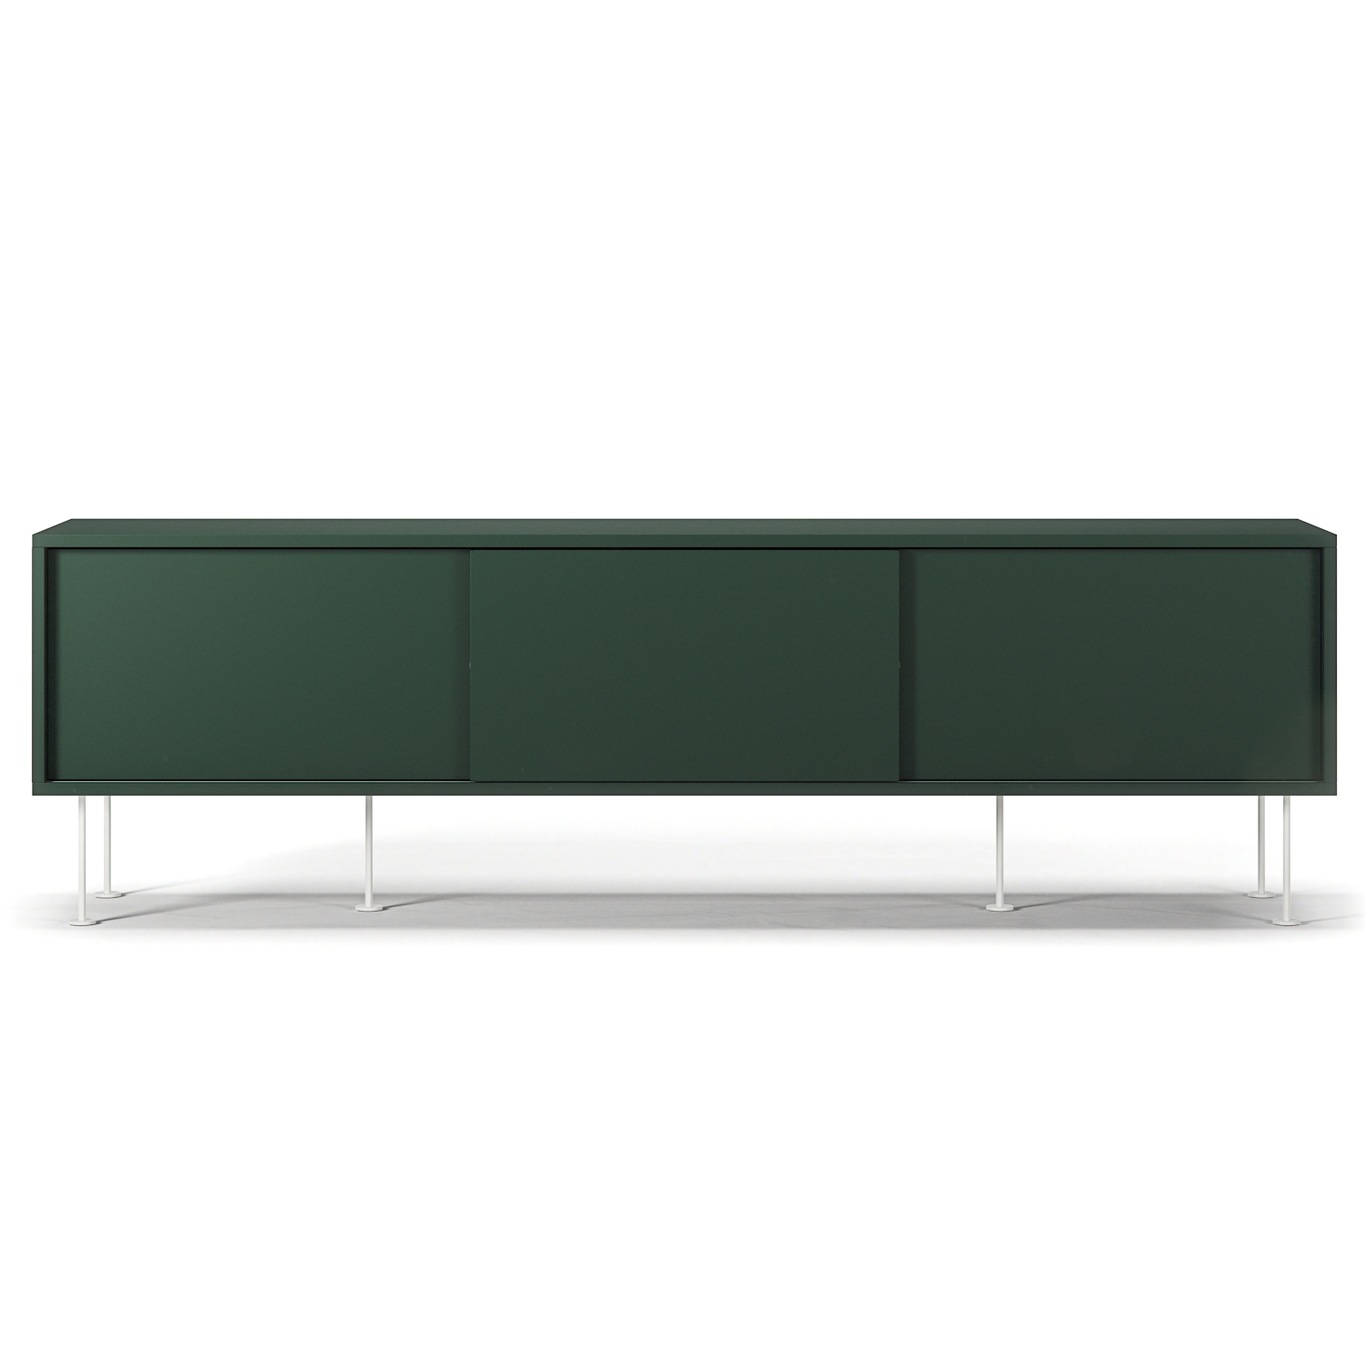 Vogue Media Bench With Legs 180 cm, Green / White